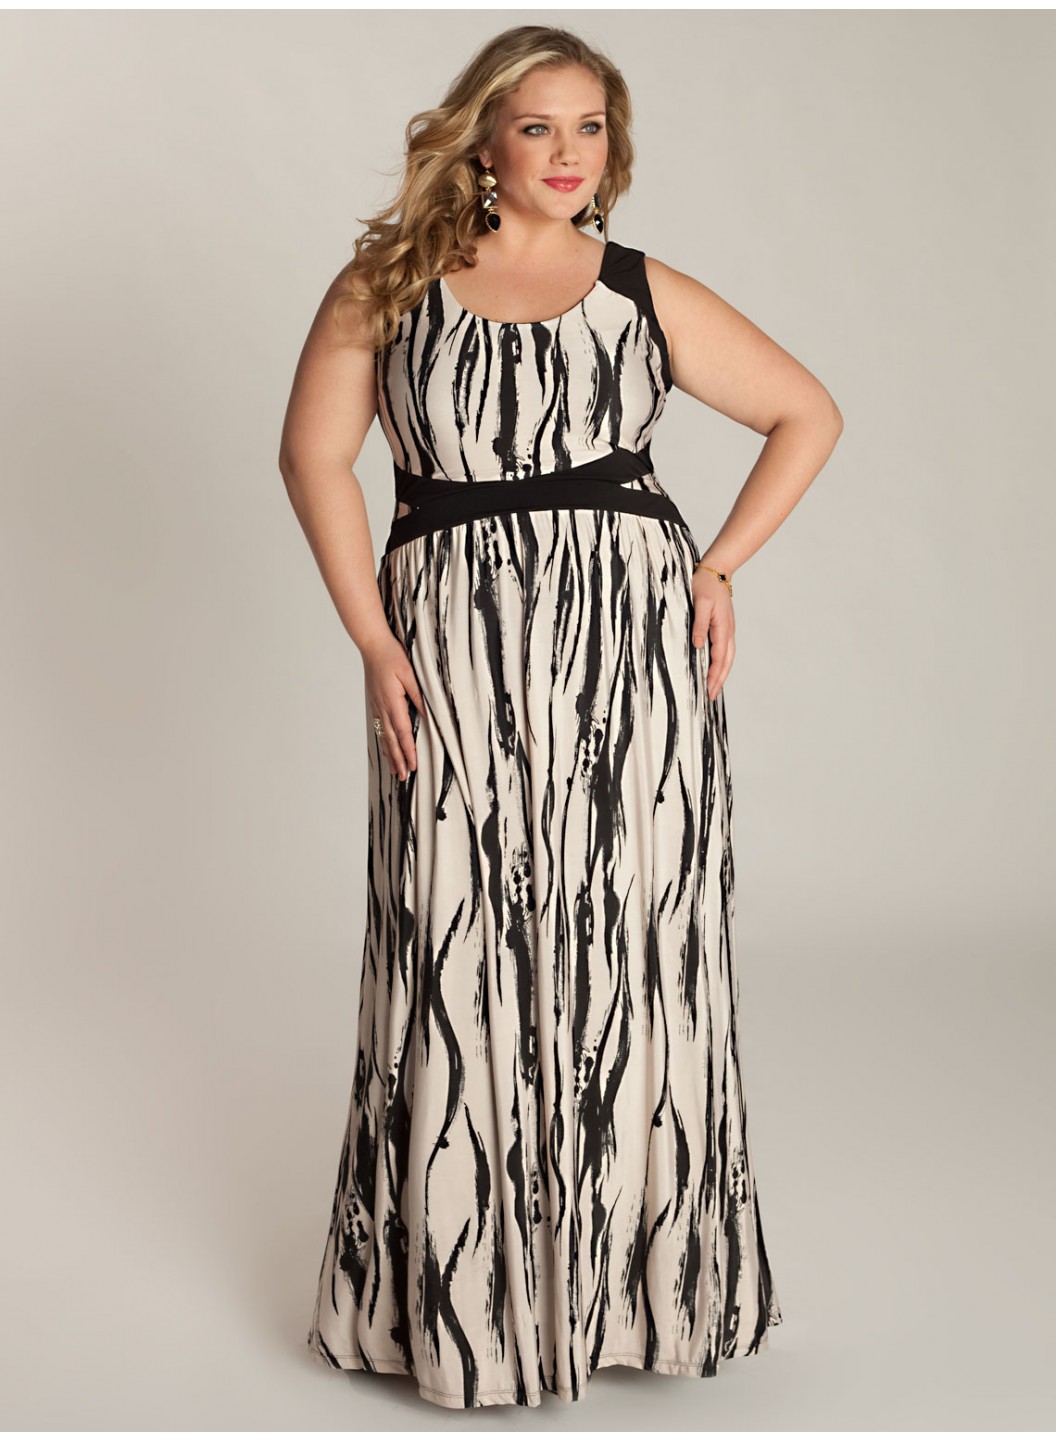 Plus size sundresses awesome collection